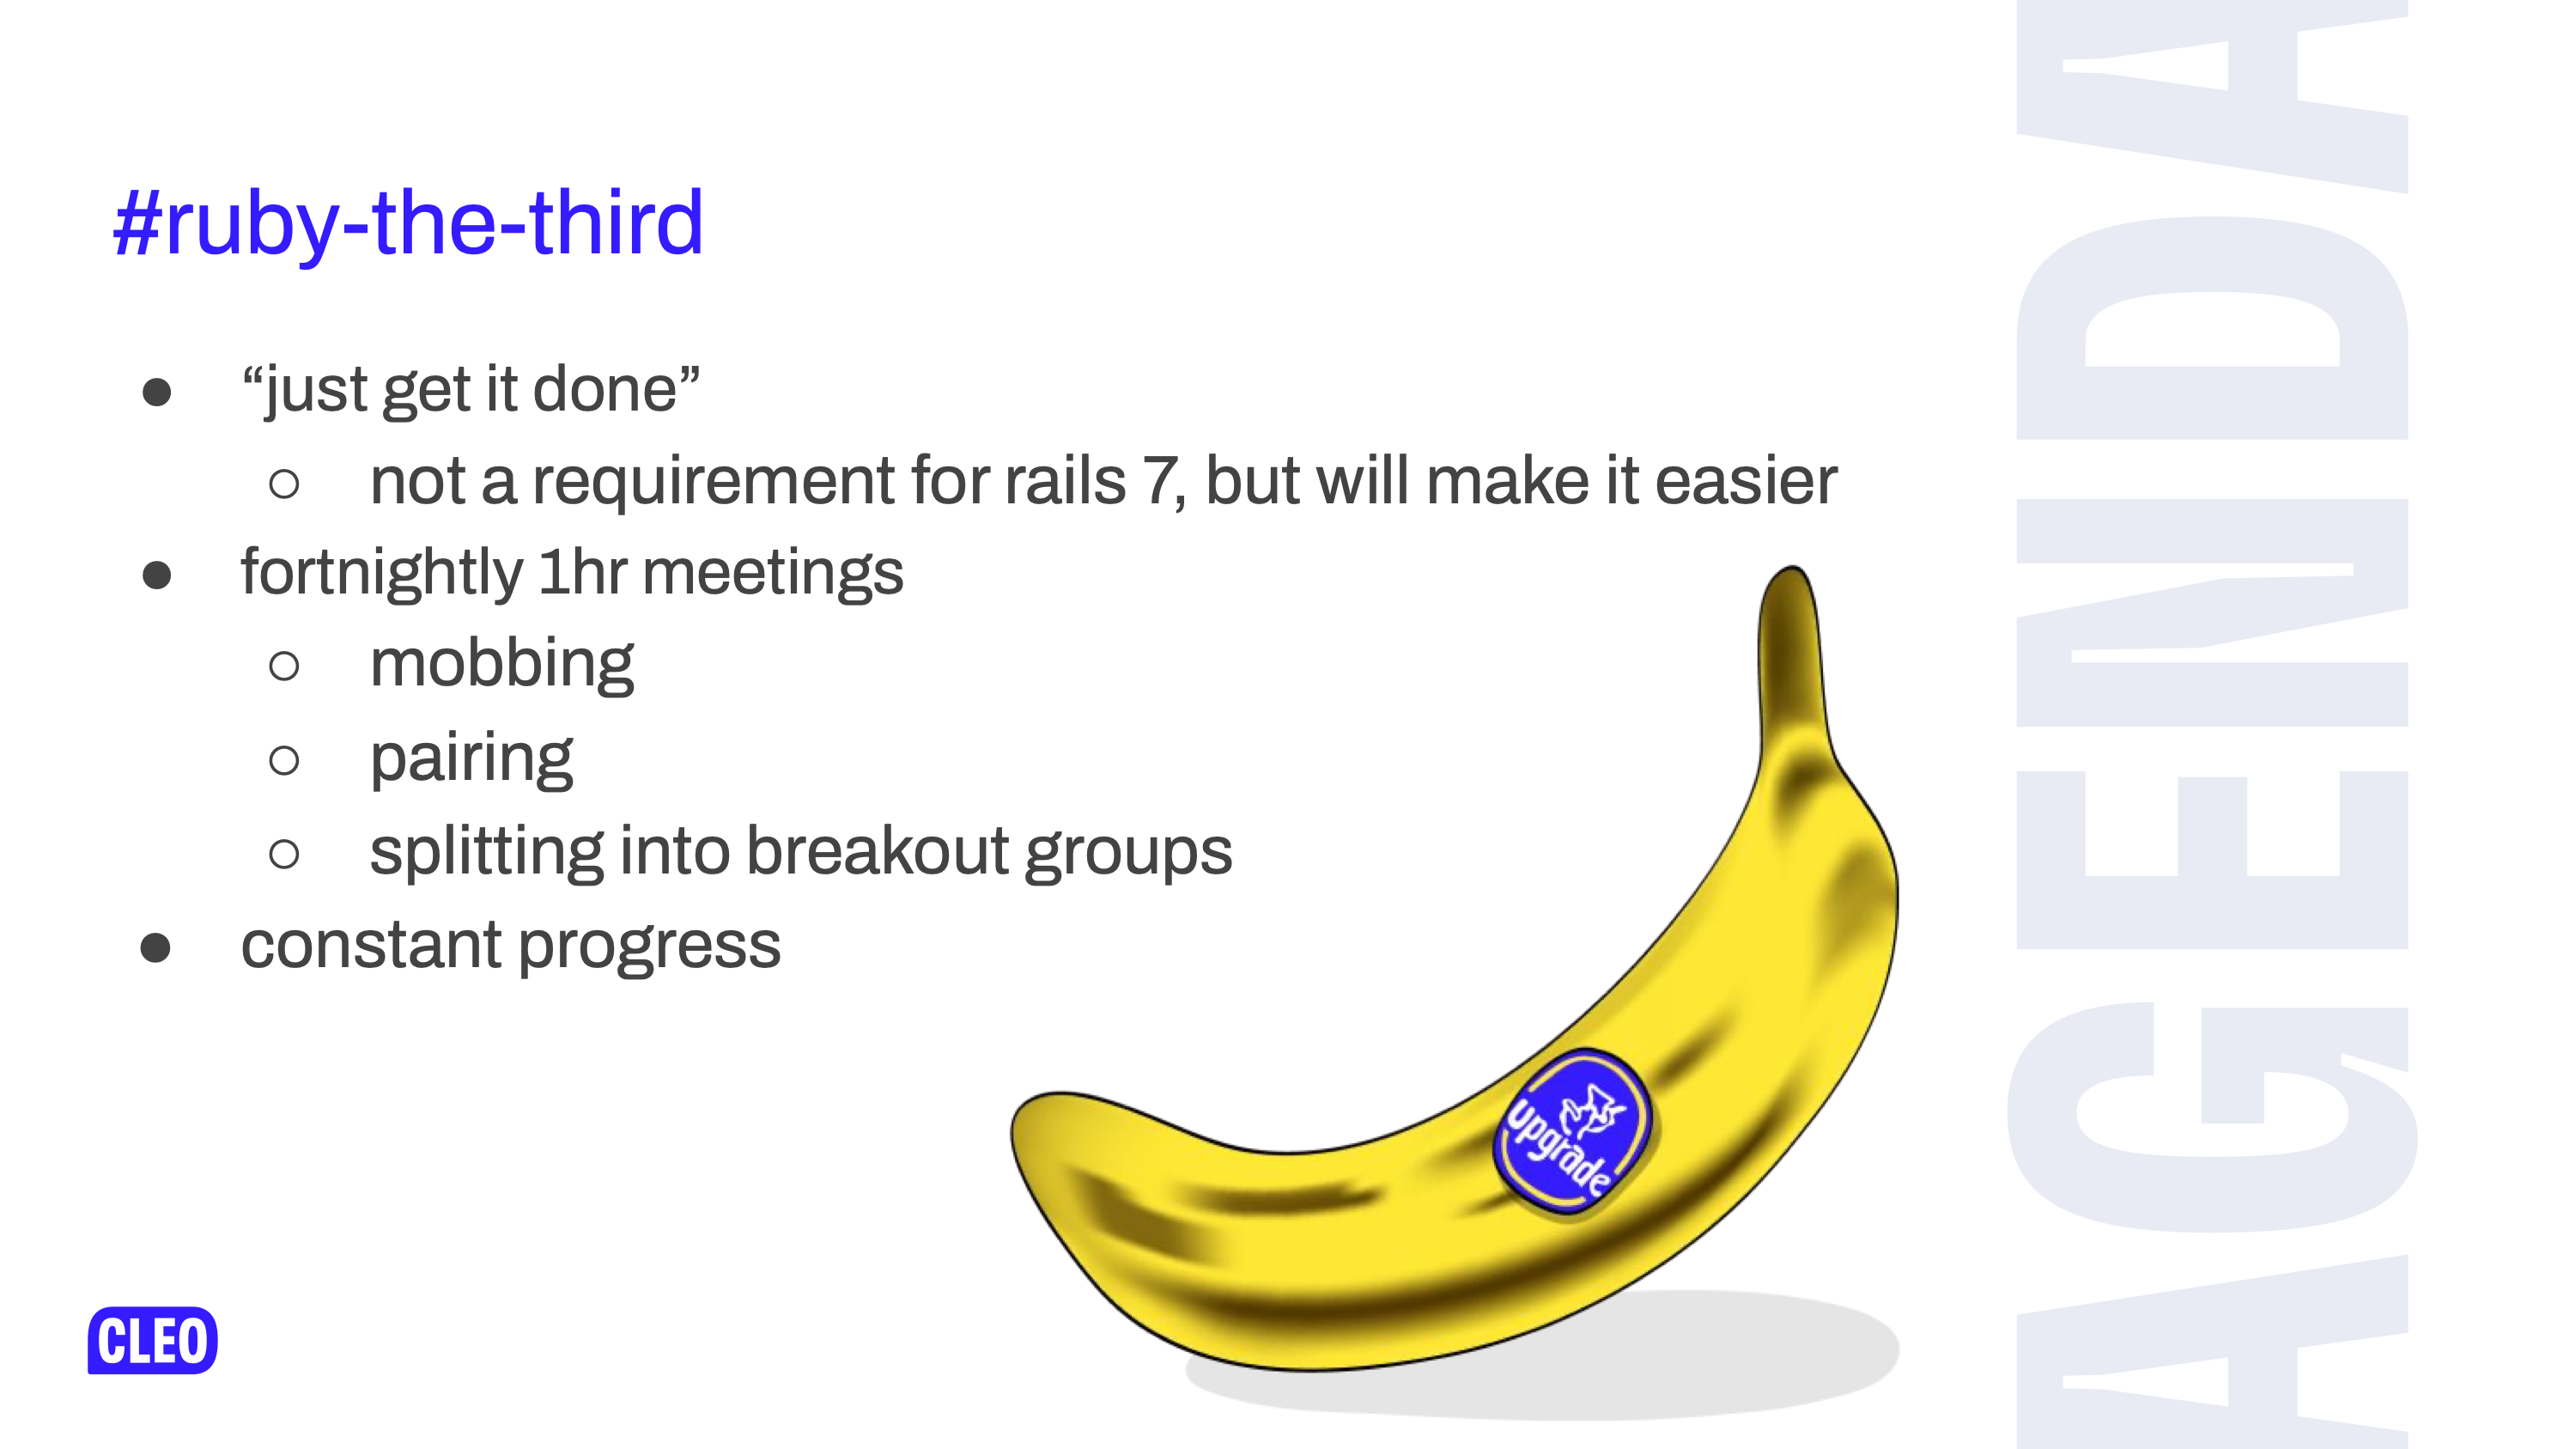 A description of our ruby 3 upgrade action group specifics, there's an image of a banana with an upgrade sticker on it; text: #ruby-the-third, just get it done, not a requirement for rails 7, but will make it easier, fortnightly 1hr meetings, mobbing, pairing, splitting into breakout groups, constant progress